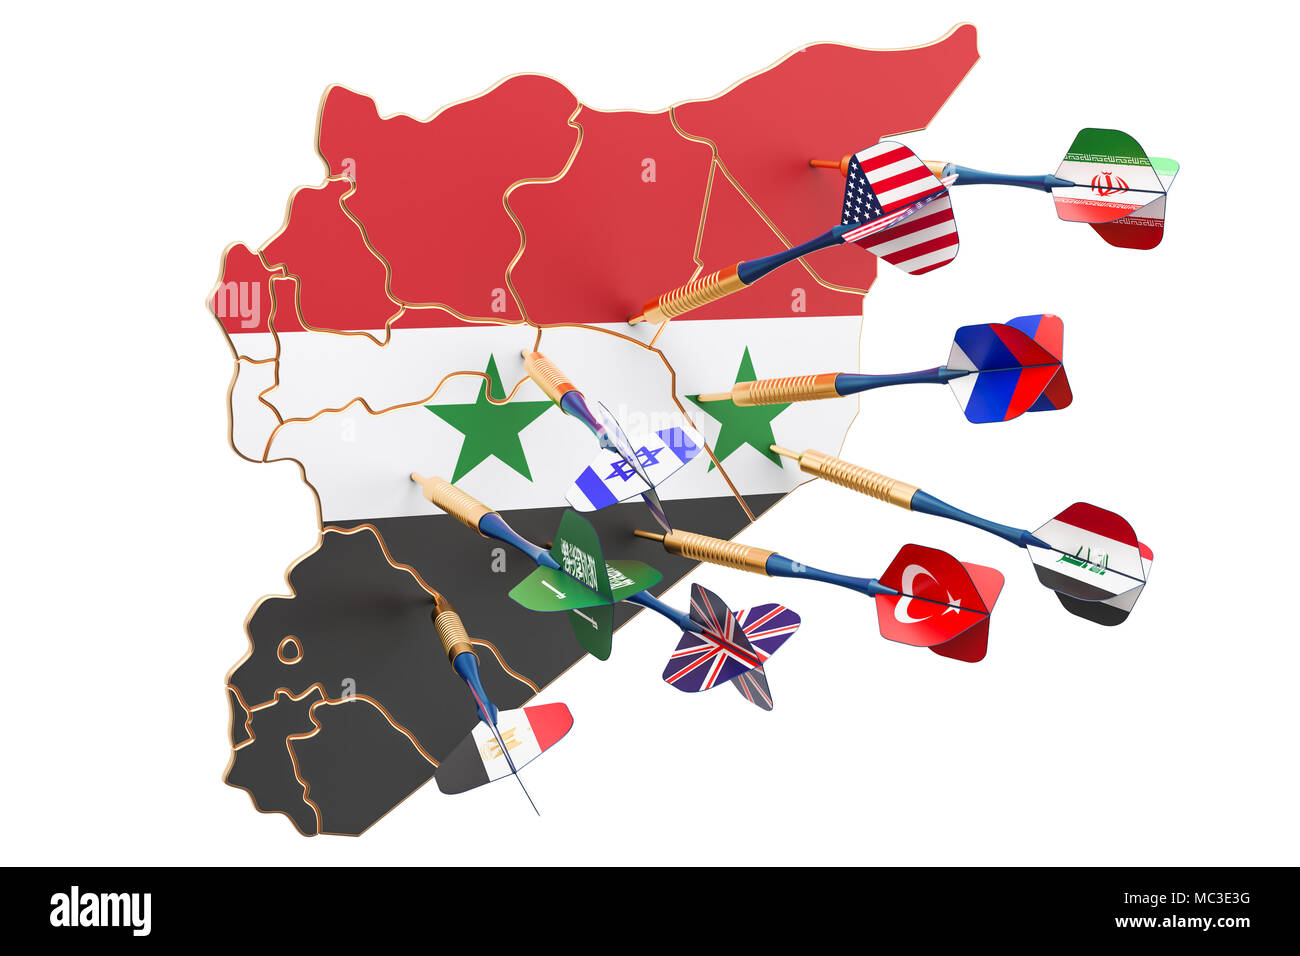 Syrian political and war conflict concept, 3D rendering Stock Photo